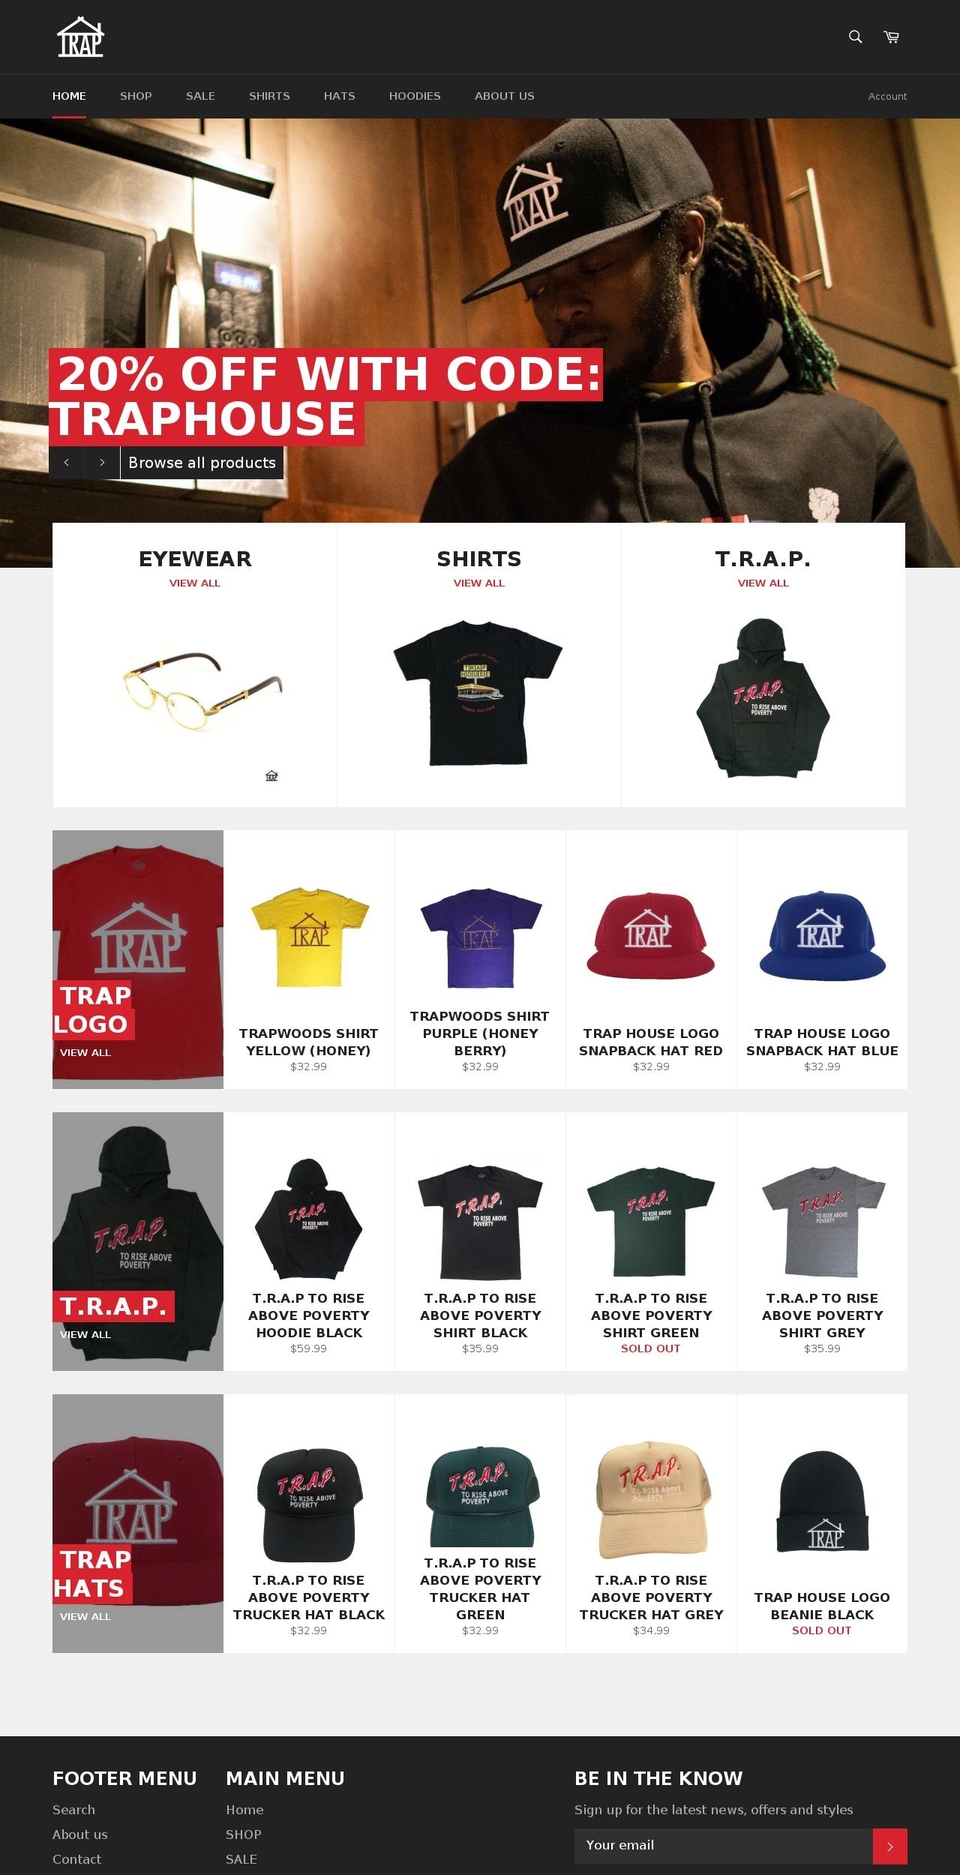 Blackout Shopify theme site example traphouseclothing.com